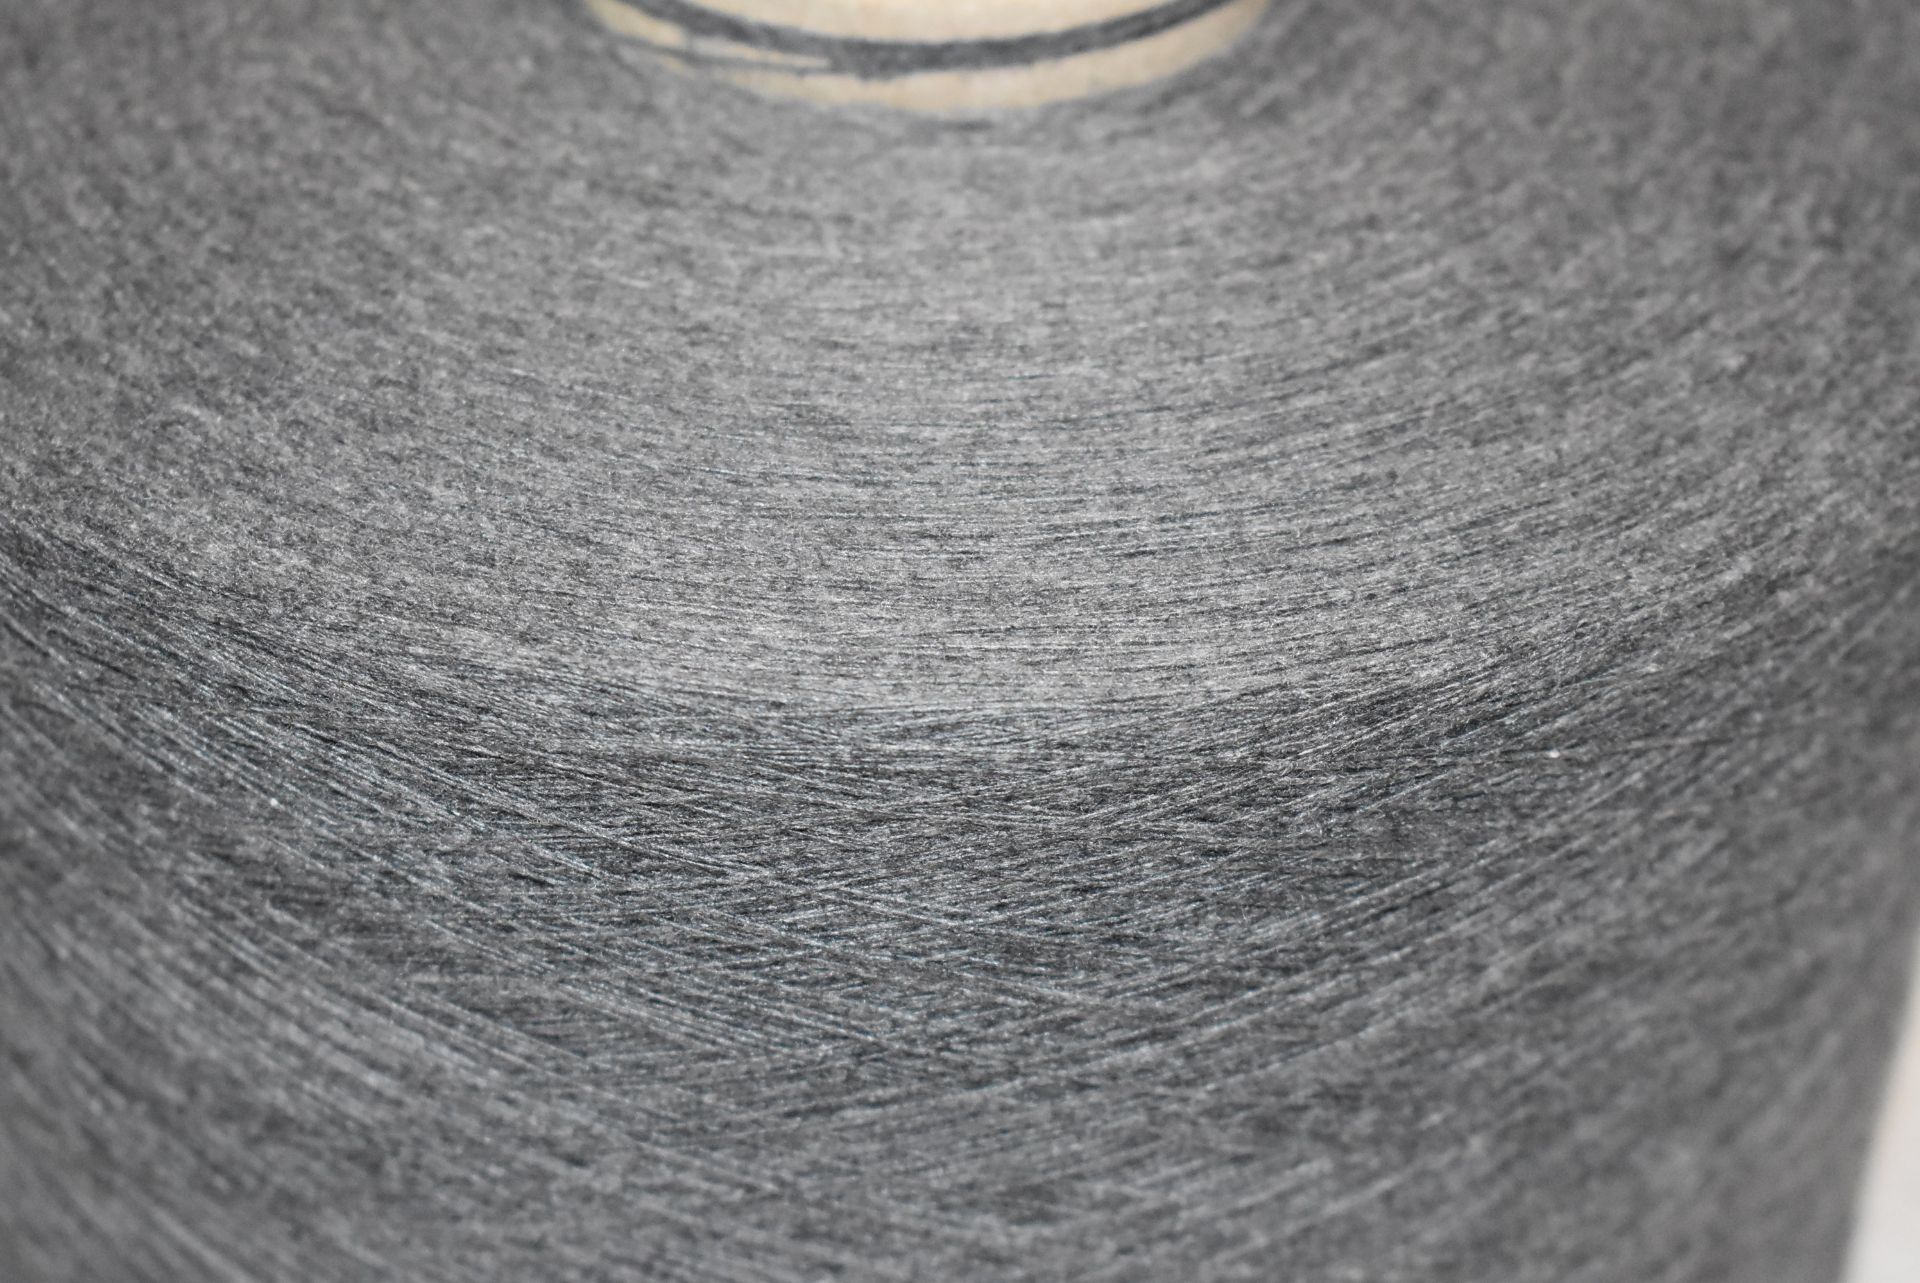 4 x Cones of 1/13 MicroCotton Knitting Yarn - Mid Grey - Approx Weight: 2,500g - New Stock ABL Yarn - Image 5 of 17